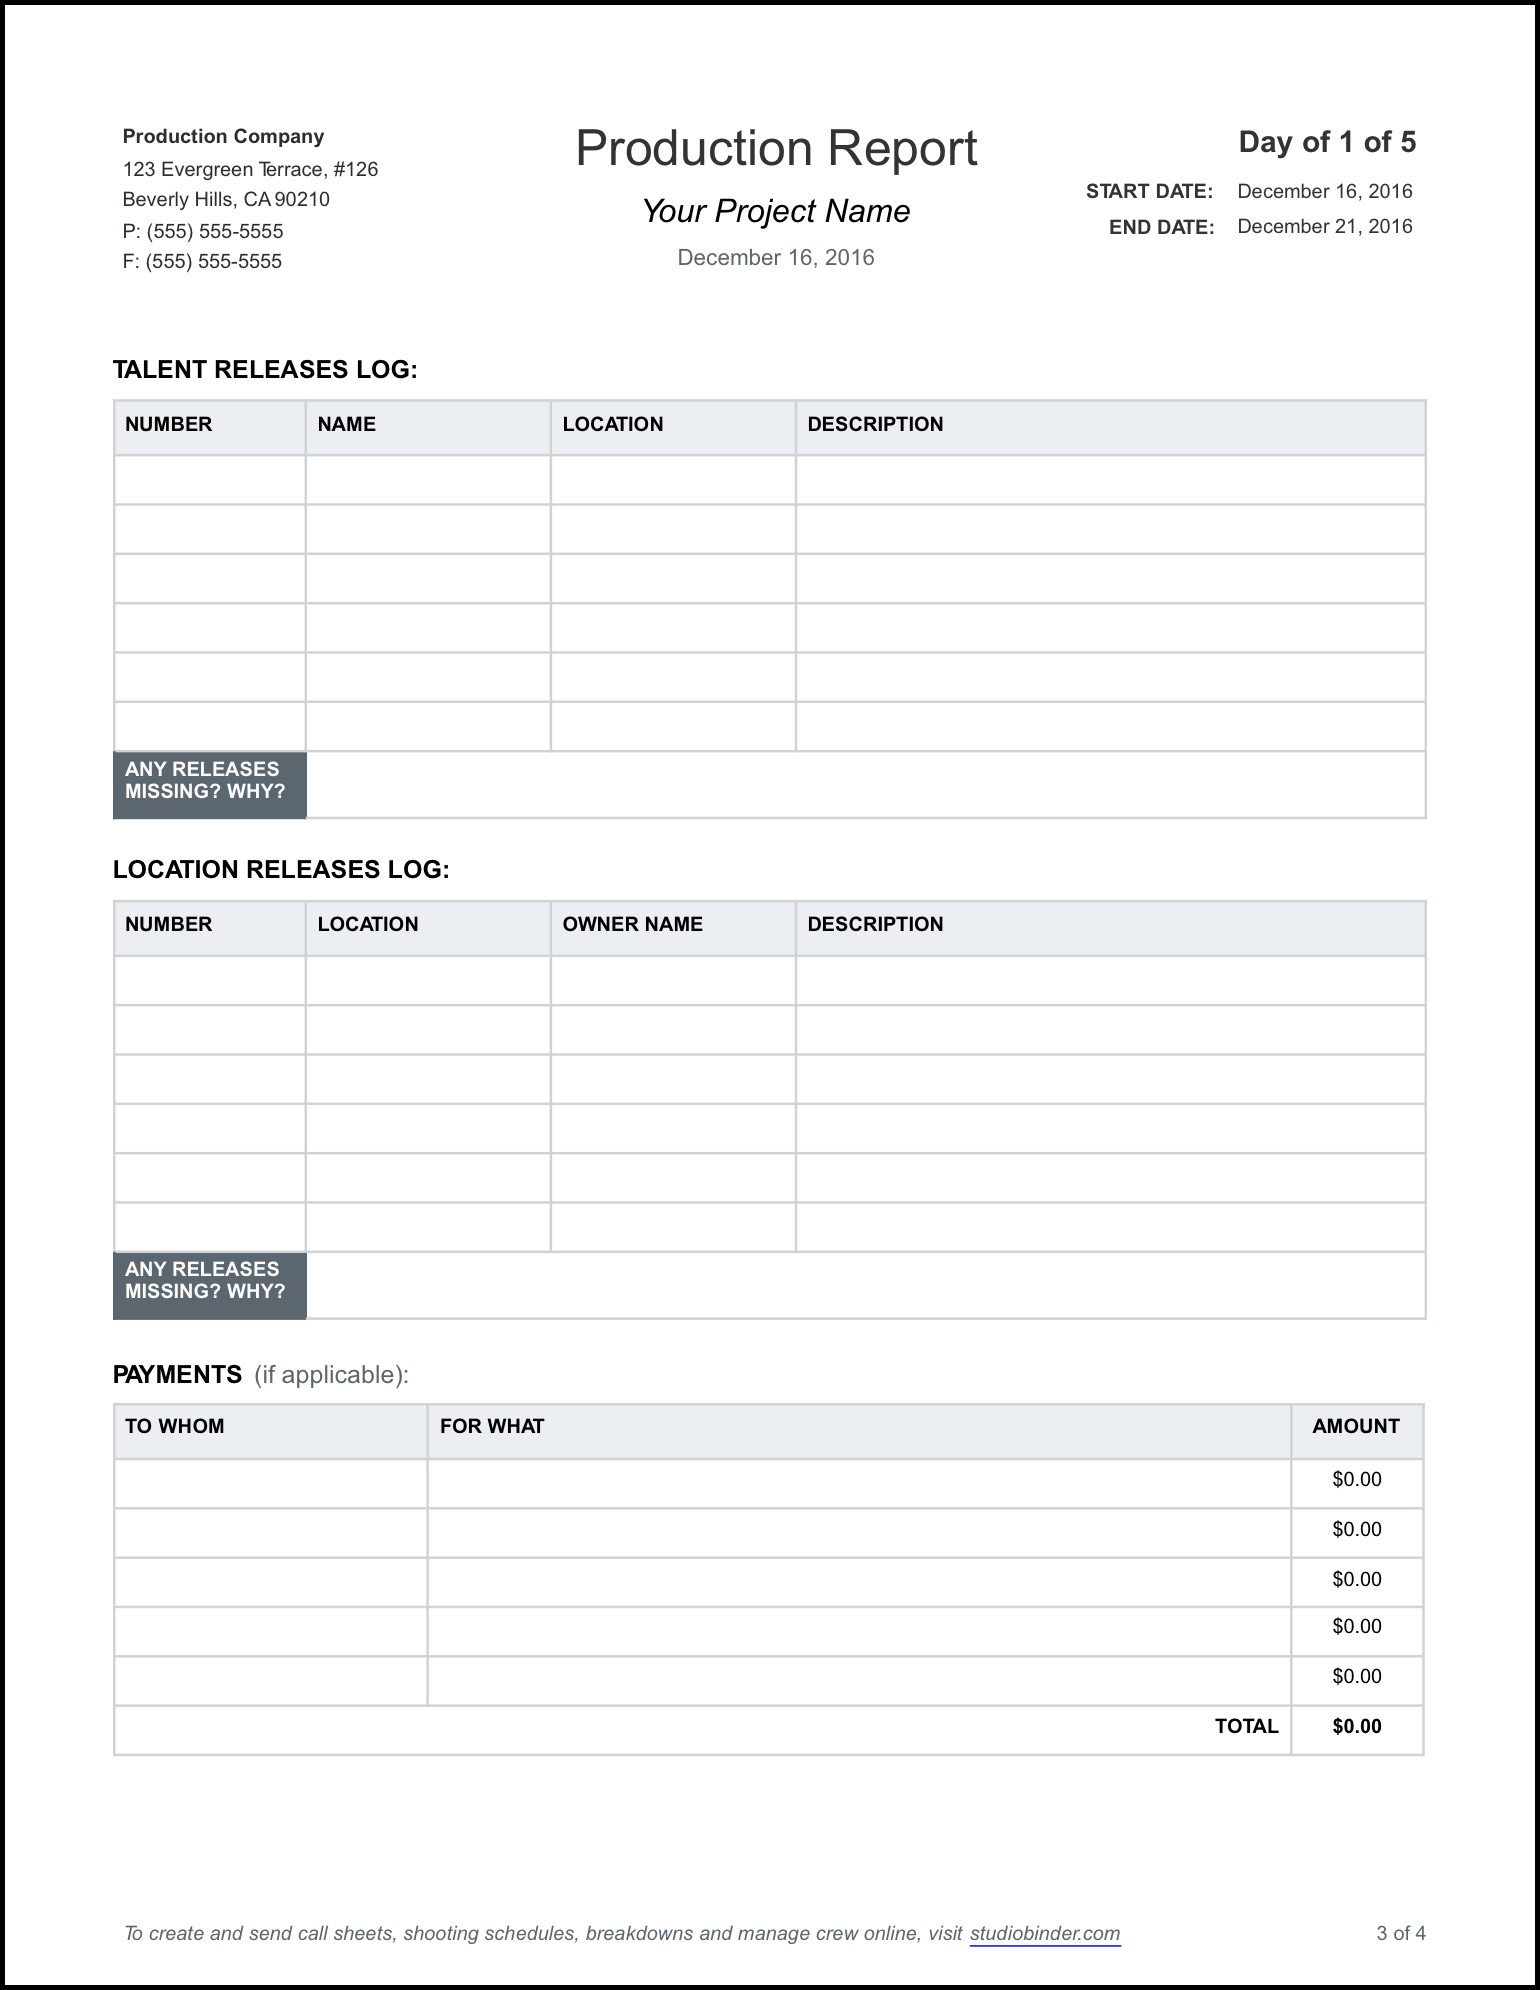 Production Reporting Templates – Horizonconsulting.co Pertaining To Construction Daily Report Template Free